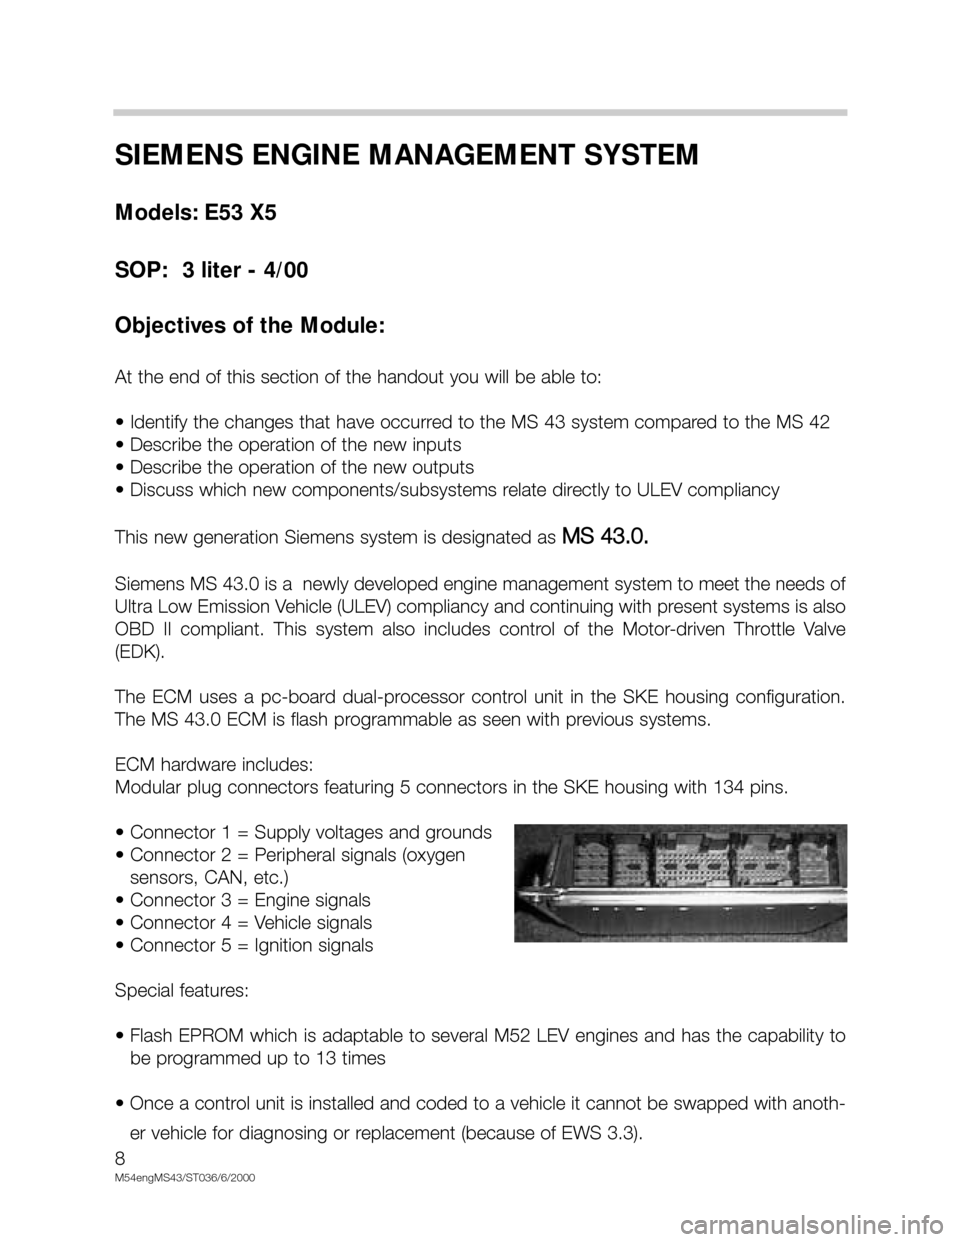 BMW X5 1999 E53 M54 Engine Workshop Manual 8
M54engMS43/ST036/6/2000
SIEMENS ENGINE MANAGEMENT SYSTEM
Models: E53 X5
SOP:  3 liter - 4/00
Objectives of the Module:
At the end of this section of the handout you will be able to:
• Identify the